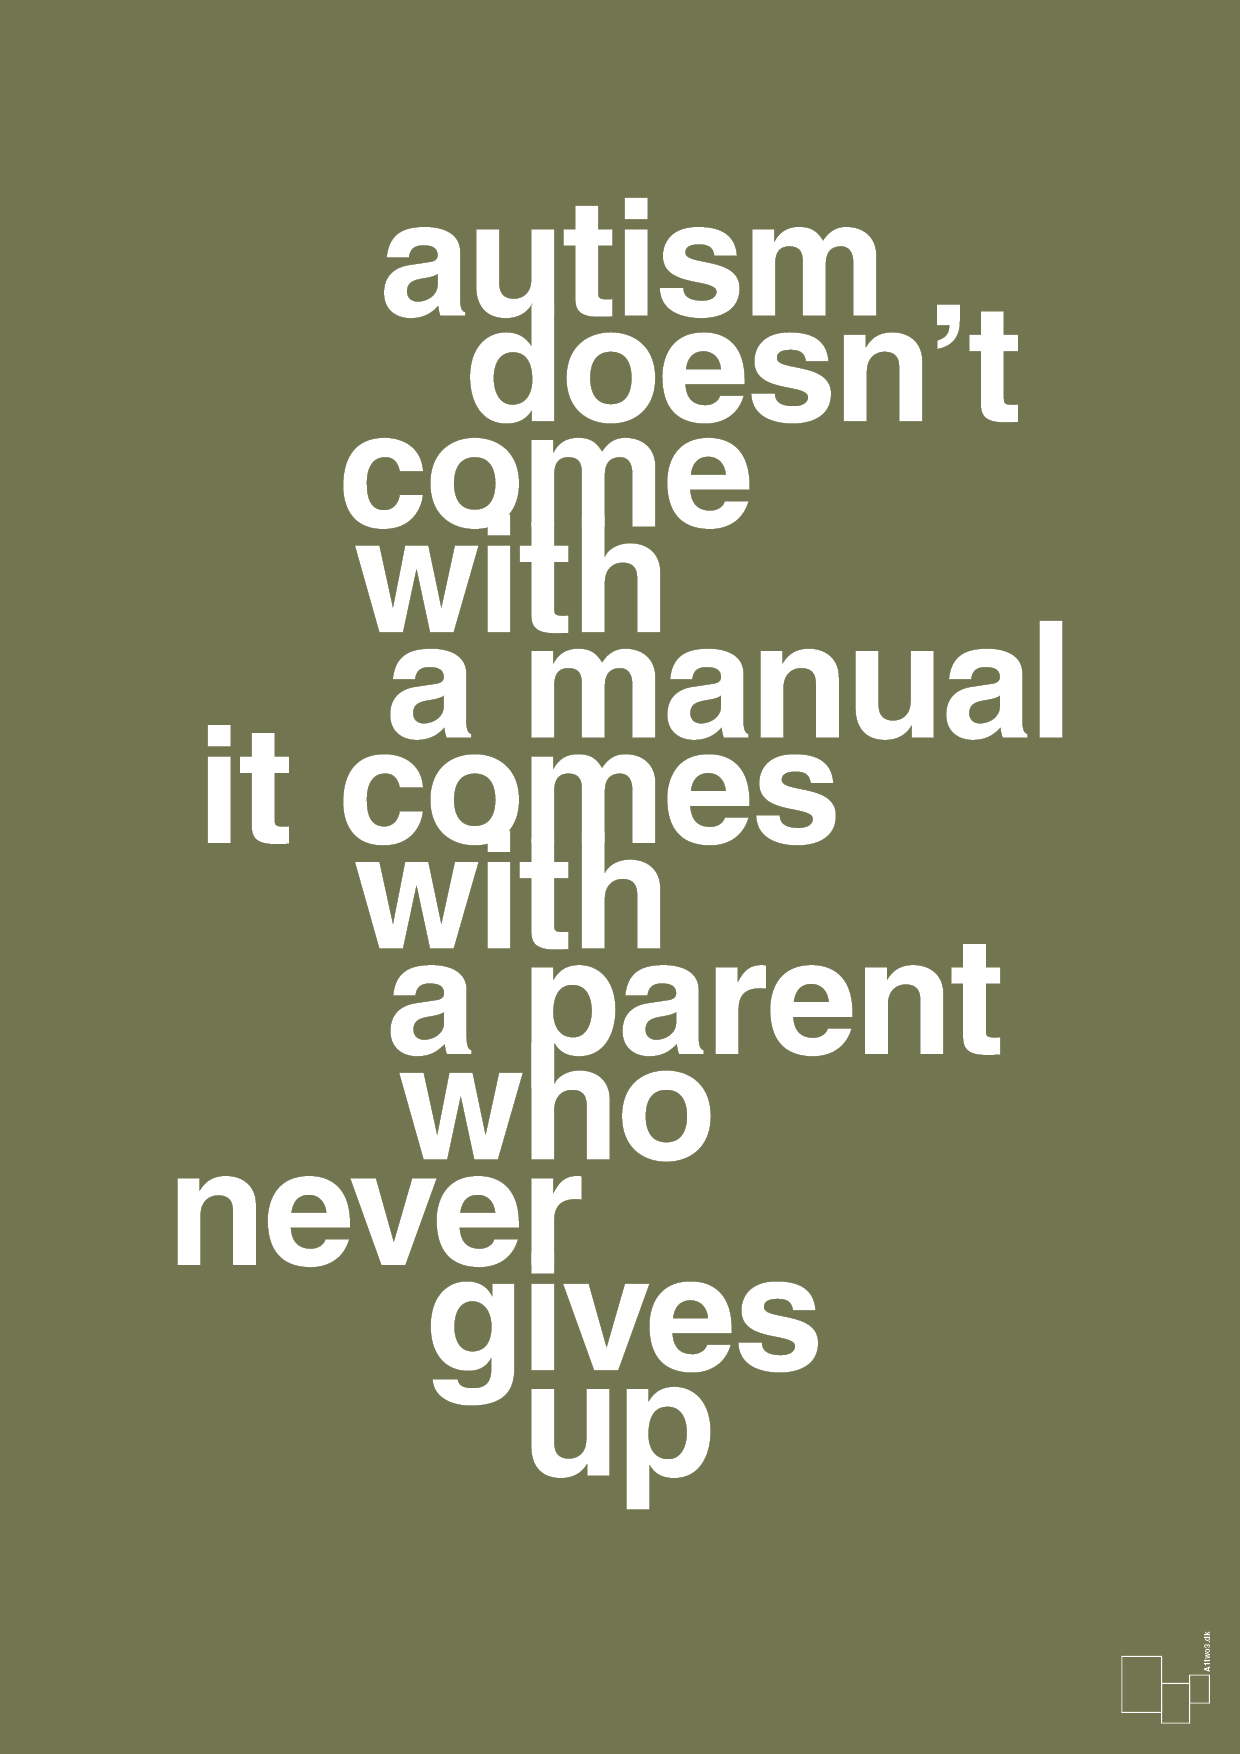 autism doesnt come with a manual it comes with a parent who never gives up - Plakat med Samfund i Secret Meadow